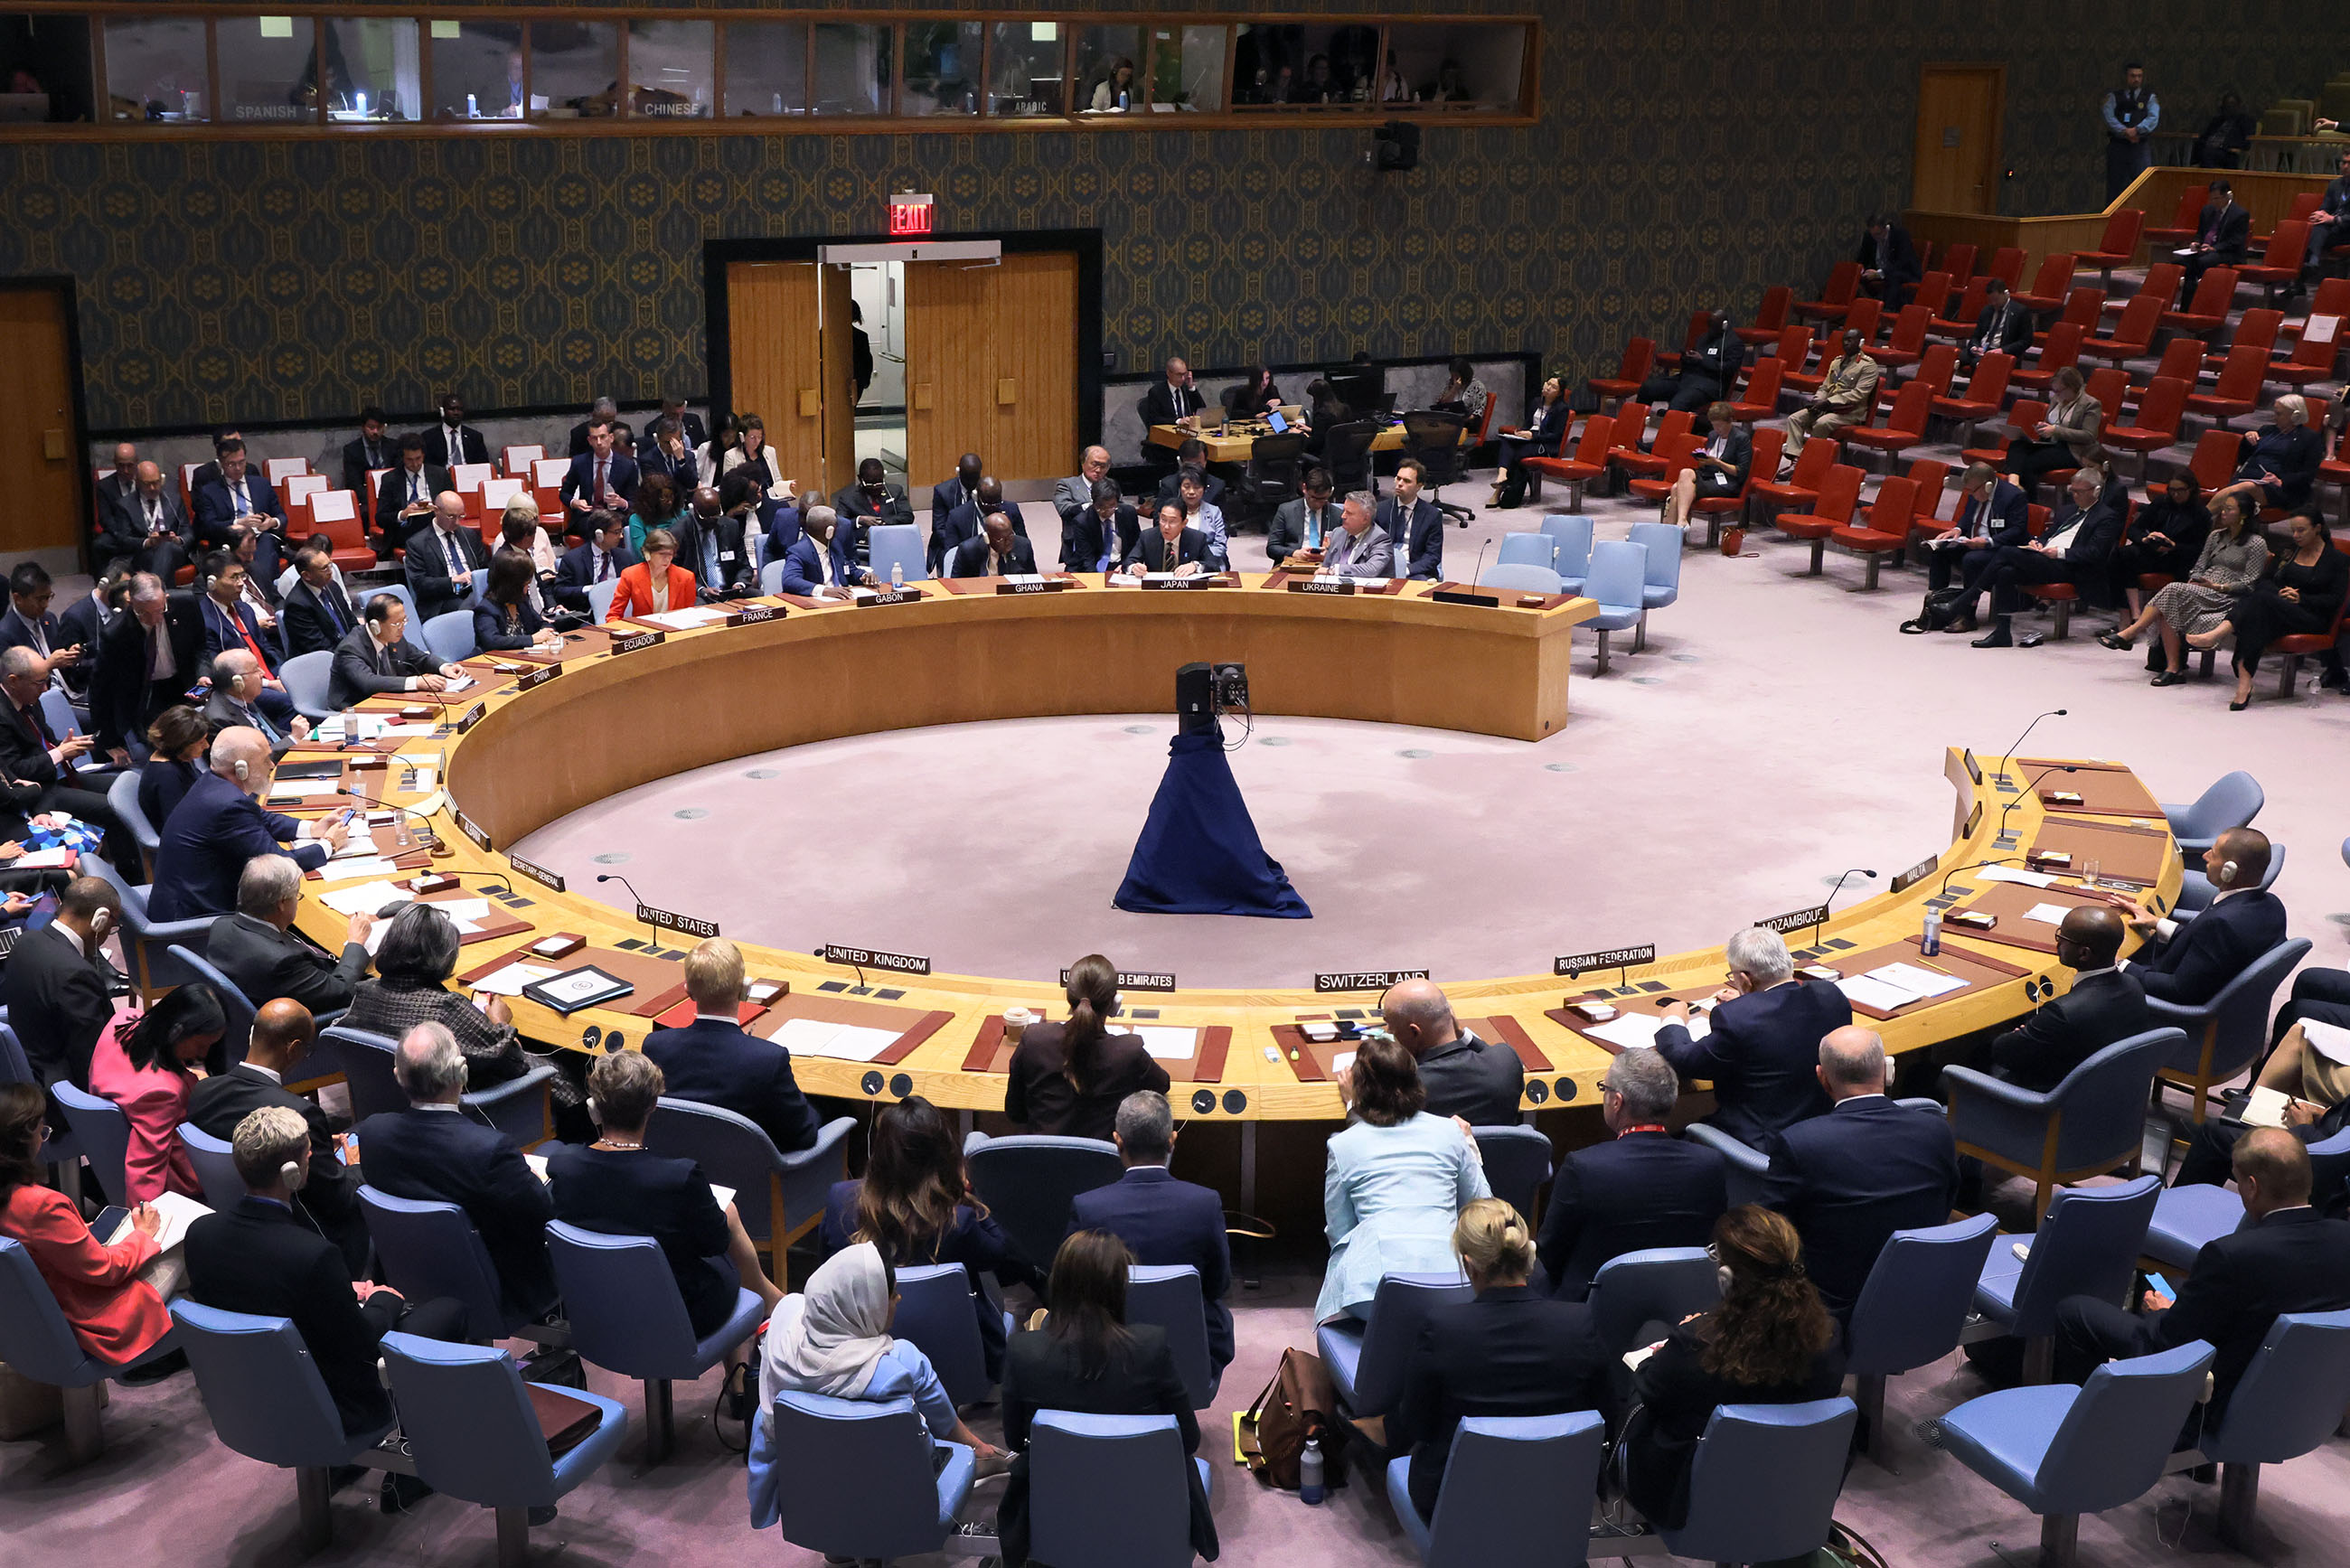 Prime Minister Kishida attending the Security Council High Level Open Debate on “Upholding the purposes and principles of the UN Charter through effective multilateralism: maintenance of peace and security of Ukraine” (6)